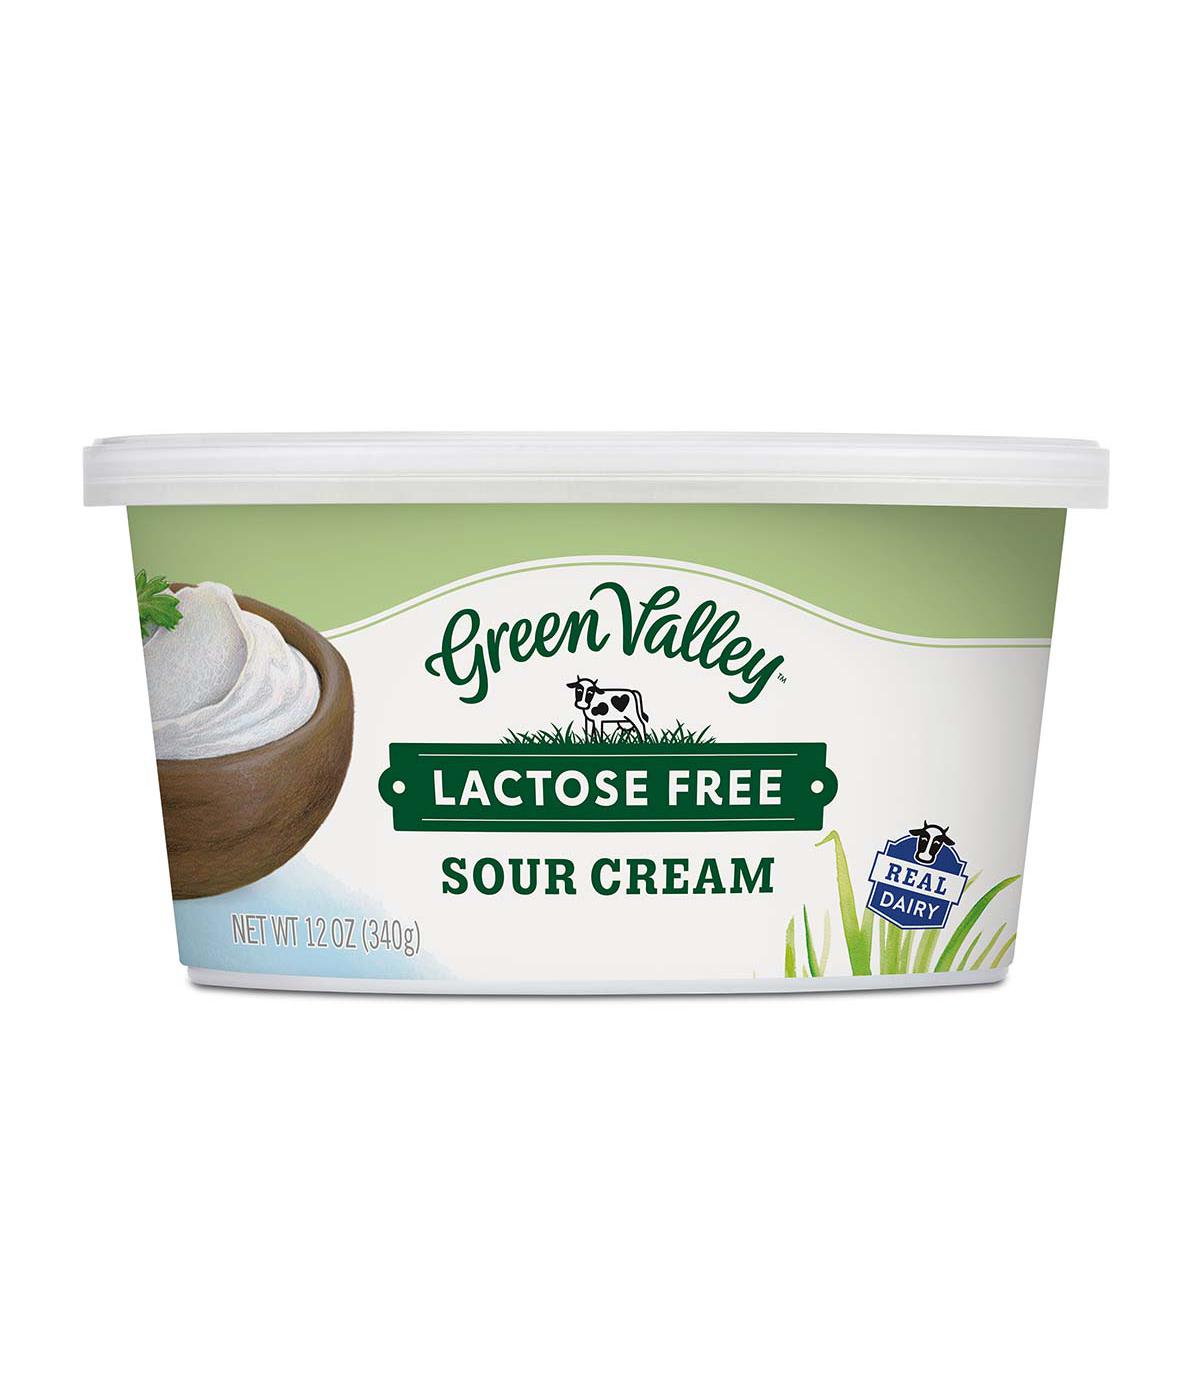 Green Valley Lactose Free Sour Cream; image 1 of 4